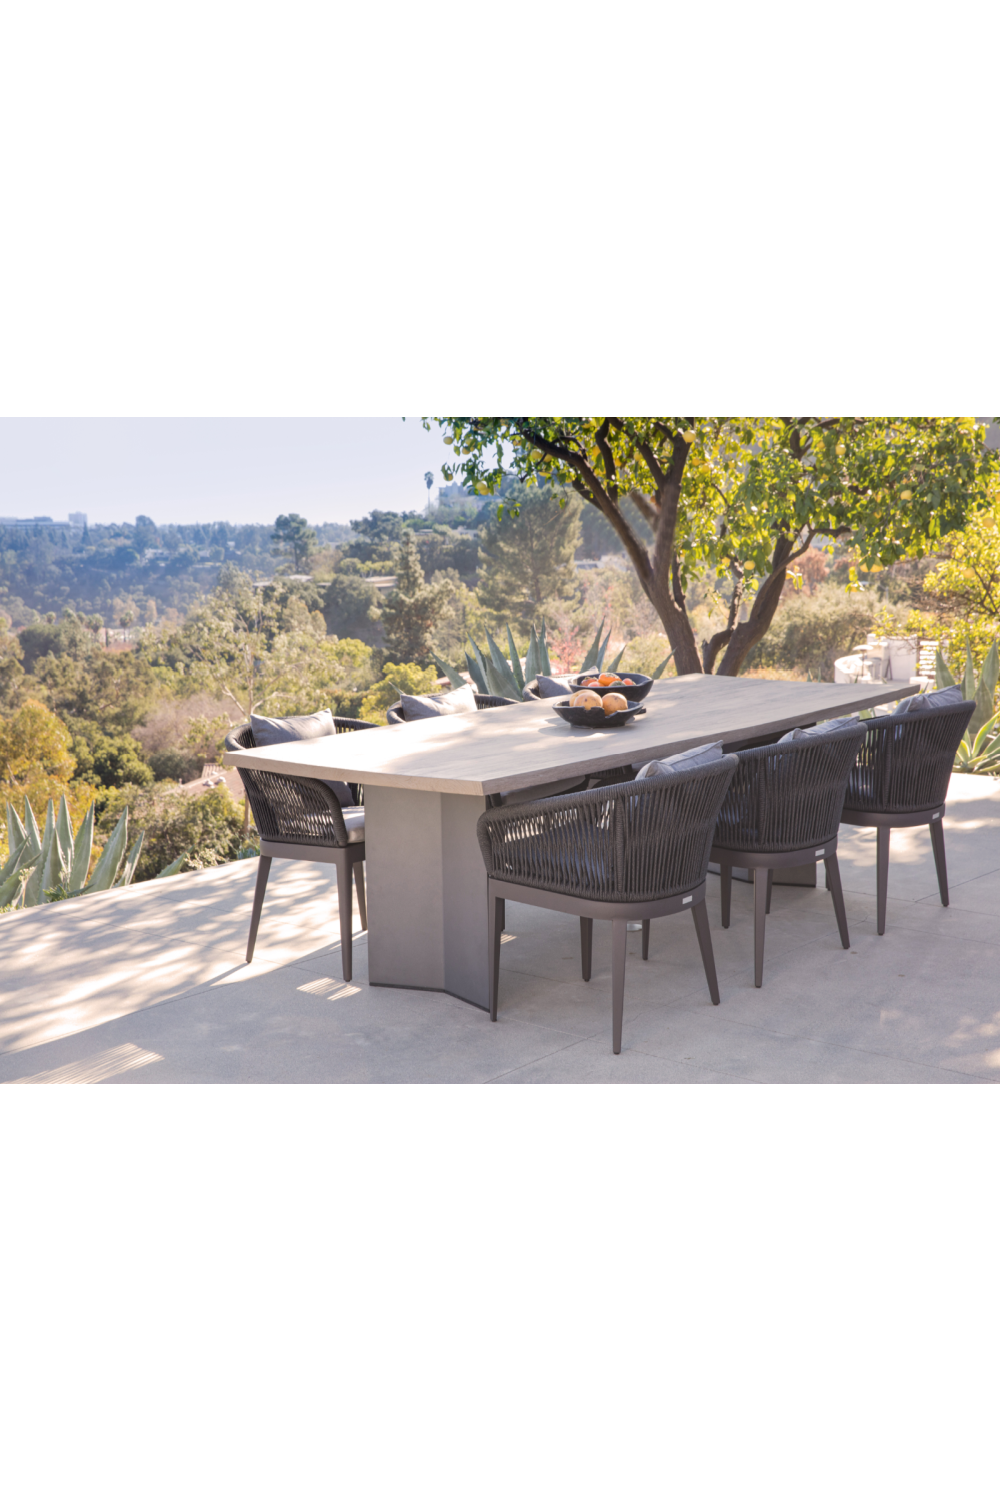 Curved Outdoor Dining Chair | Andrew Martin Voyage | OROA